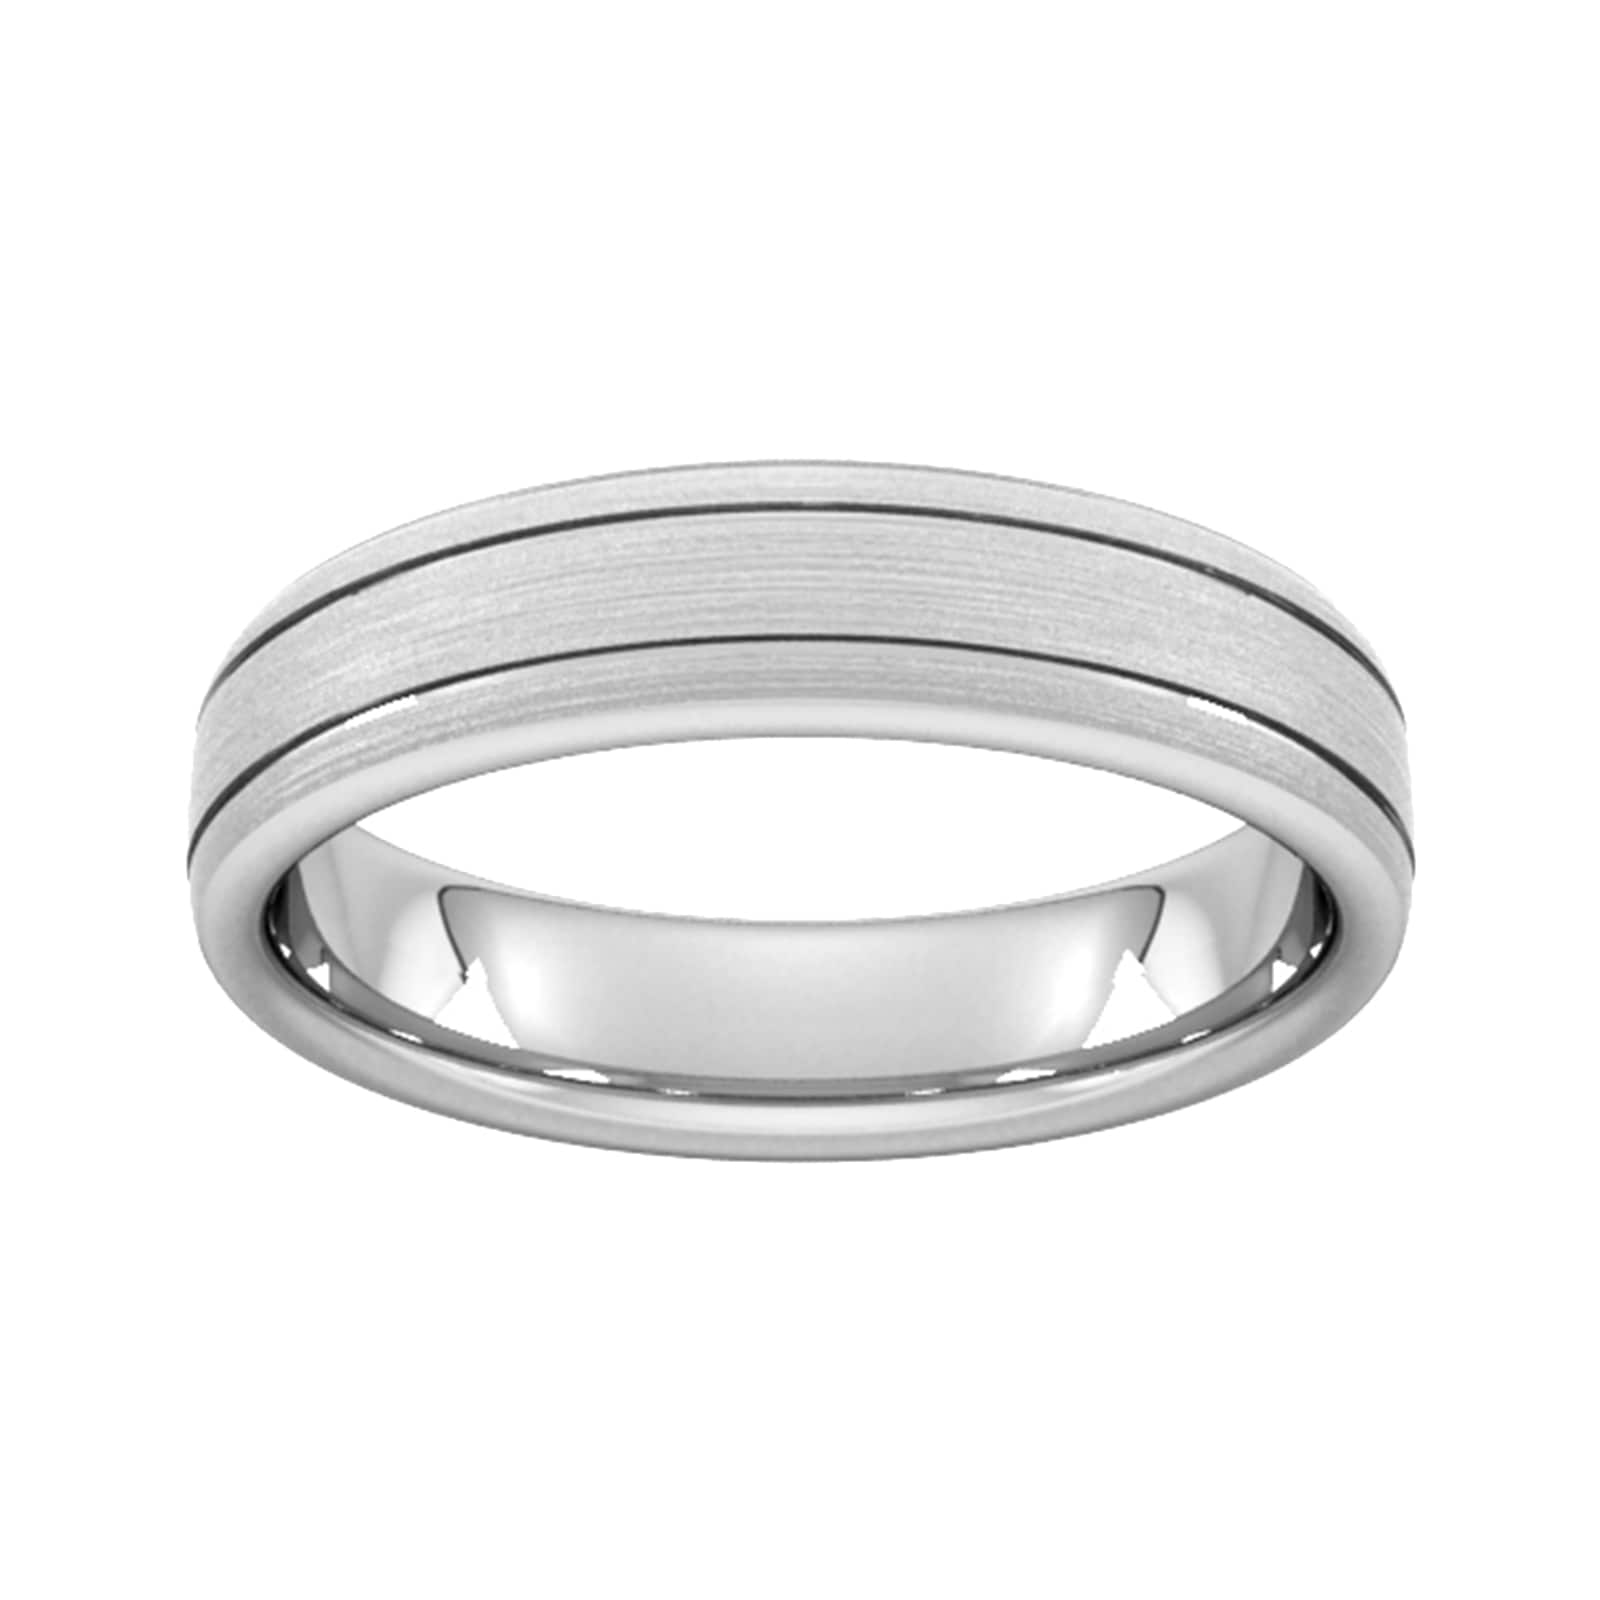 5mm Flat Court Heavy Matt Finish With Double Grooves Wedding Ring In 950 Palladium - Ring Size W